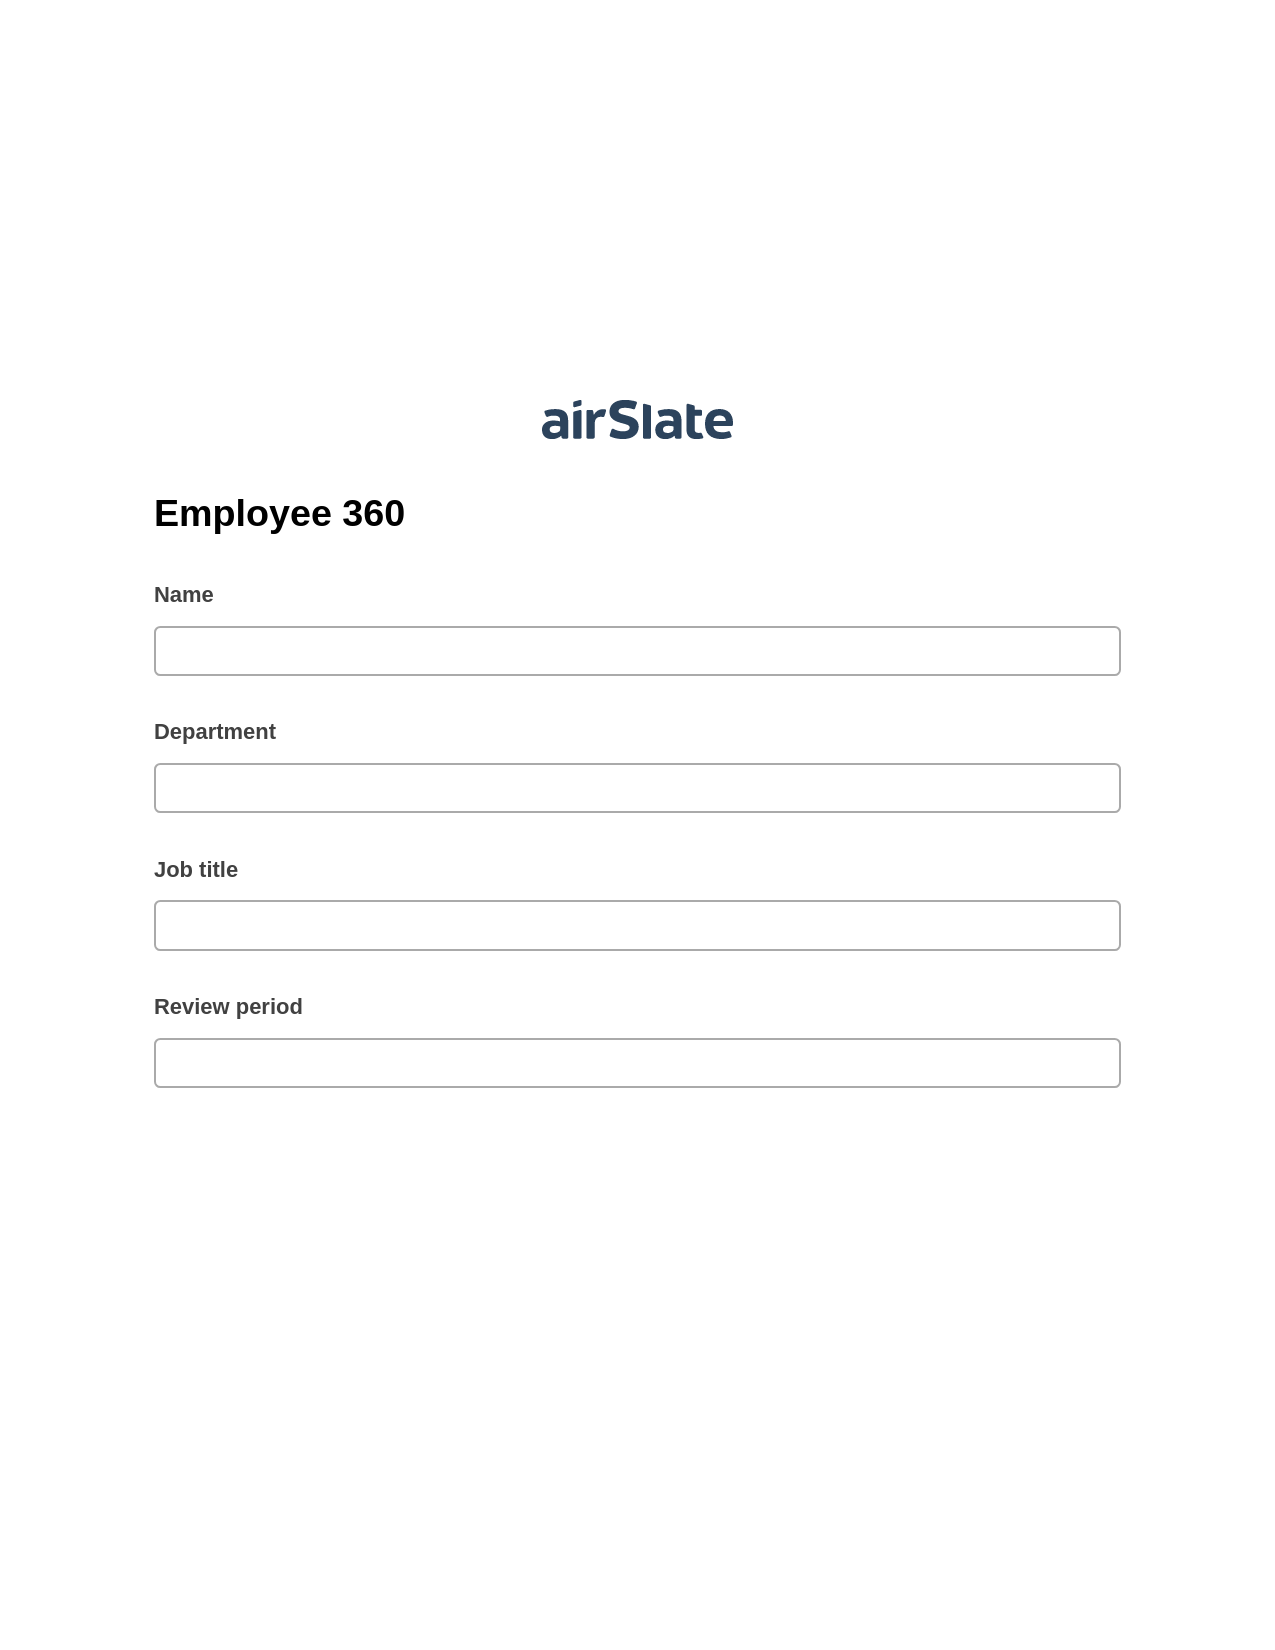 Employee 360 Pre-fill from Google Sheets Bot, Hide Signatures Bot, Archive to SharePoint Folder Bot